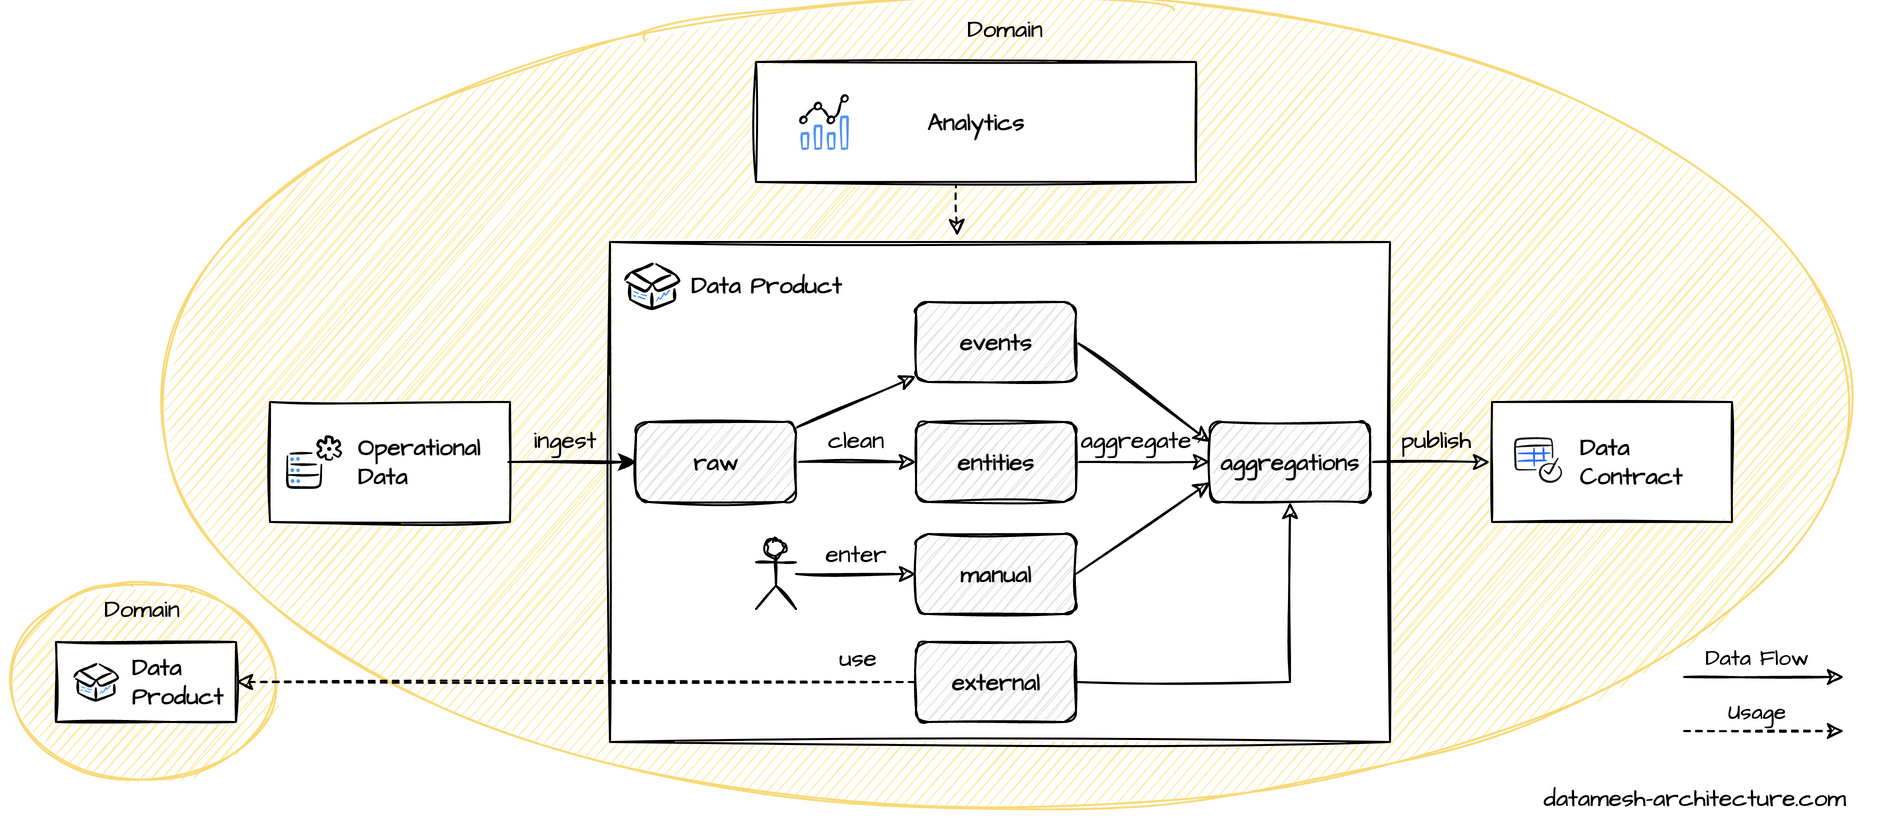 More detailed view on the analytical data of the data mesh architecture